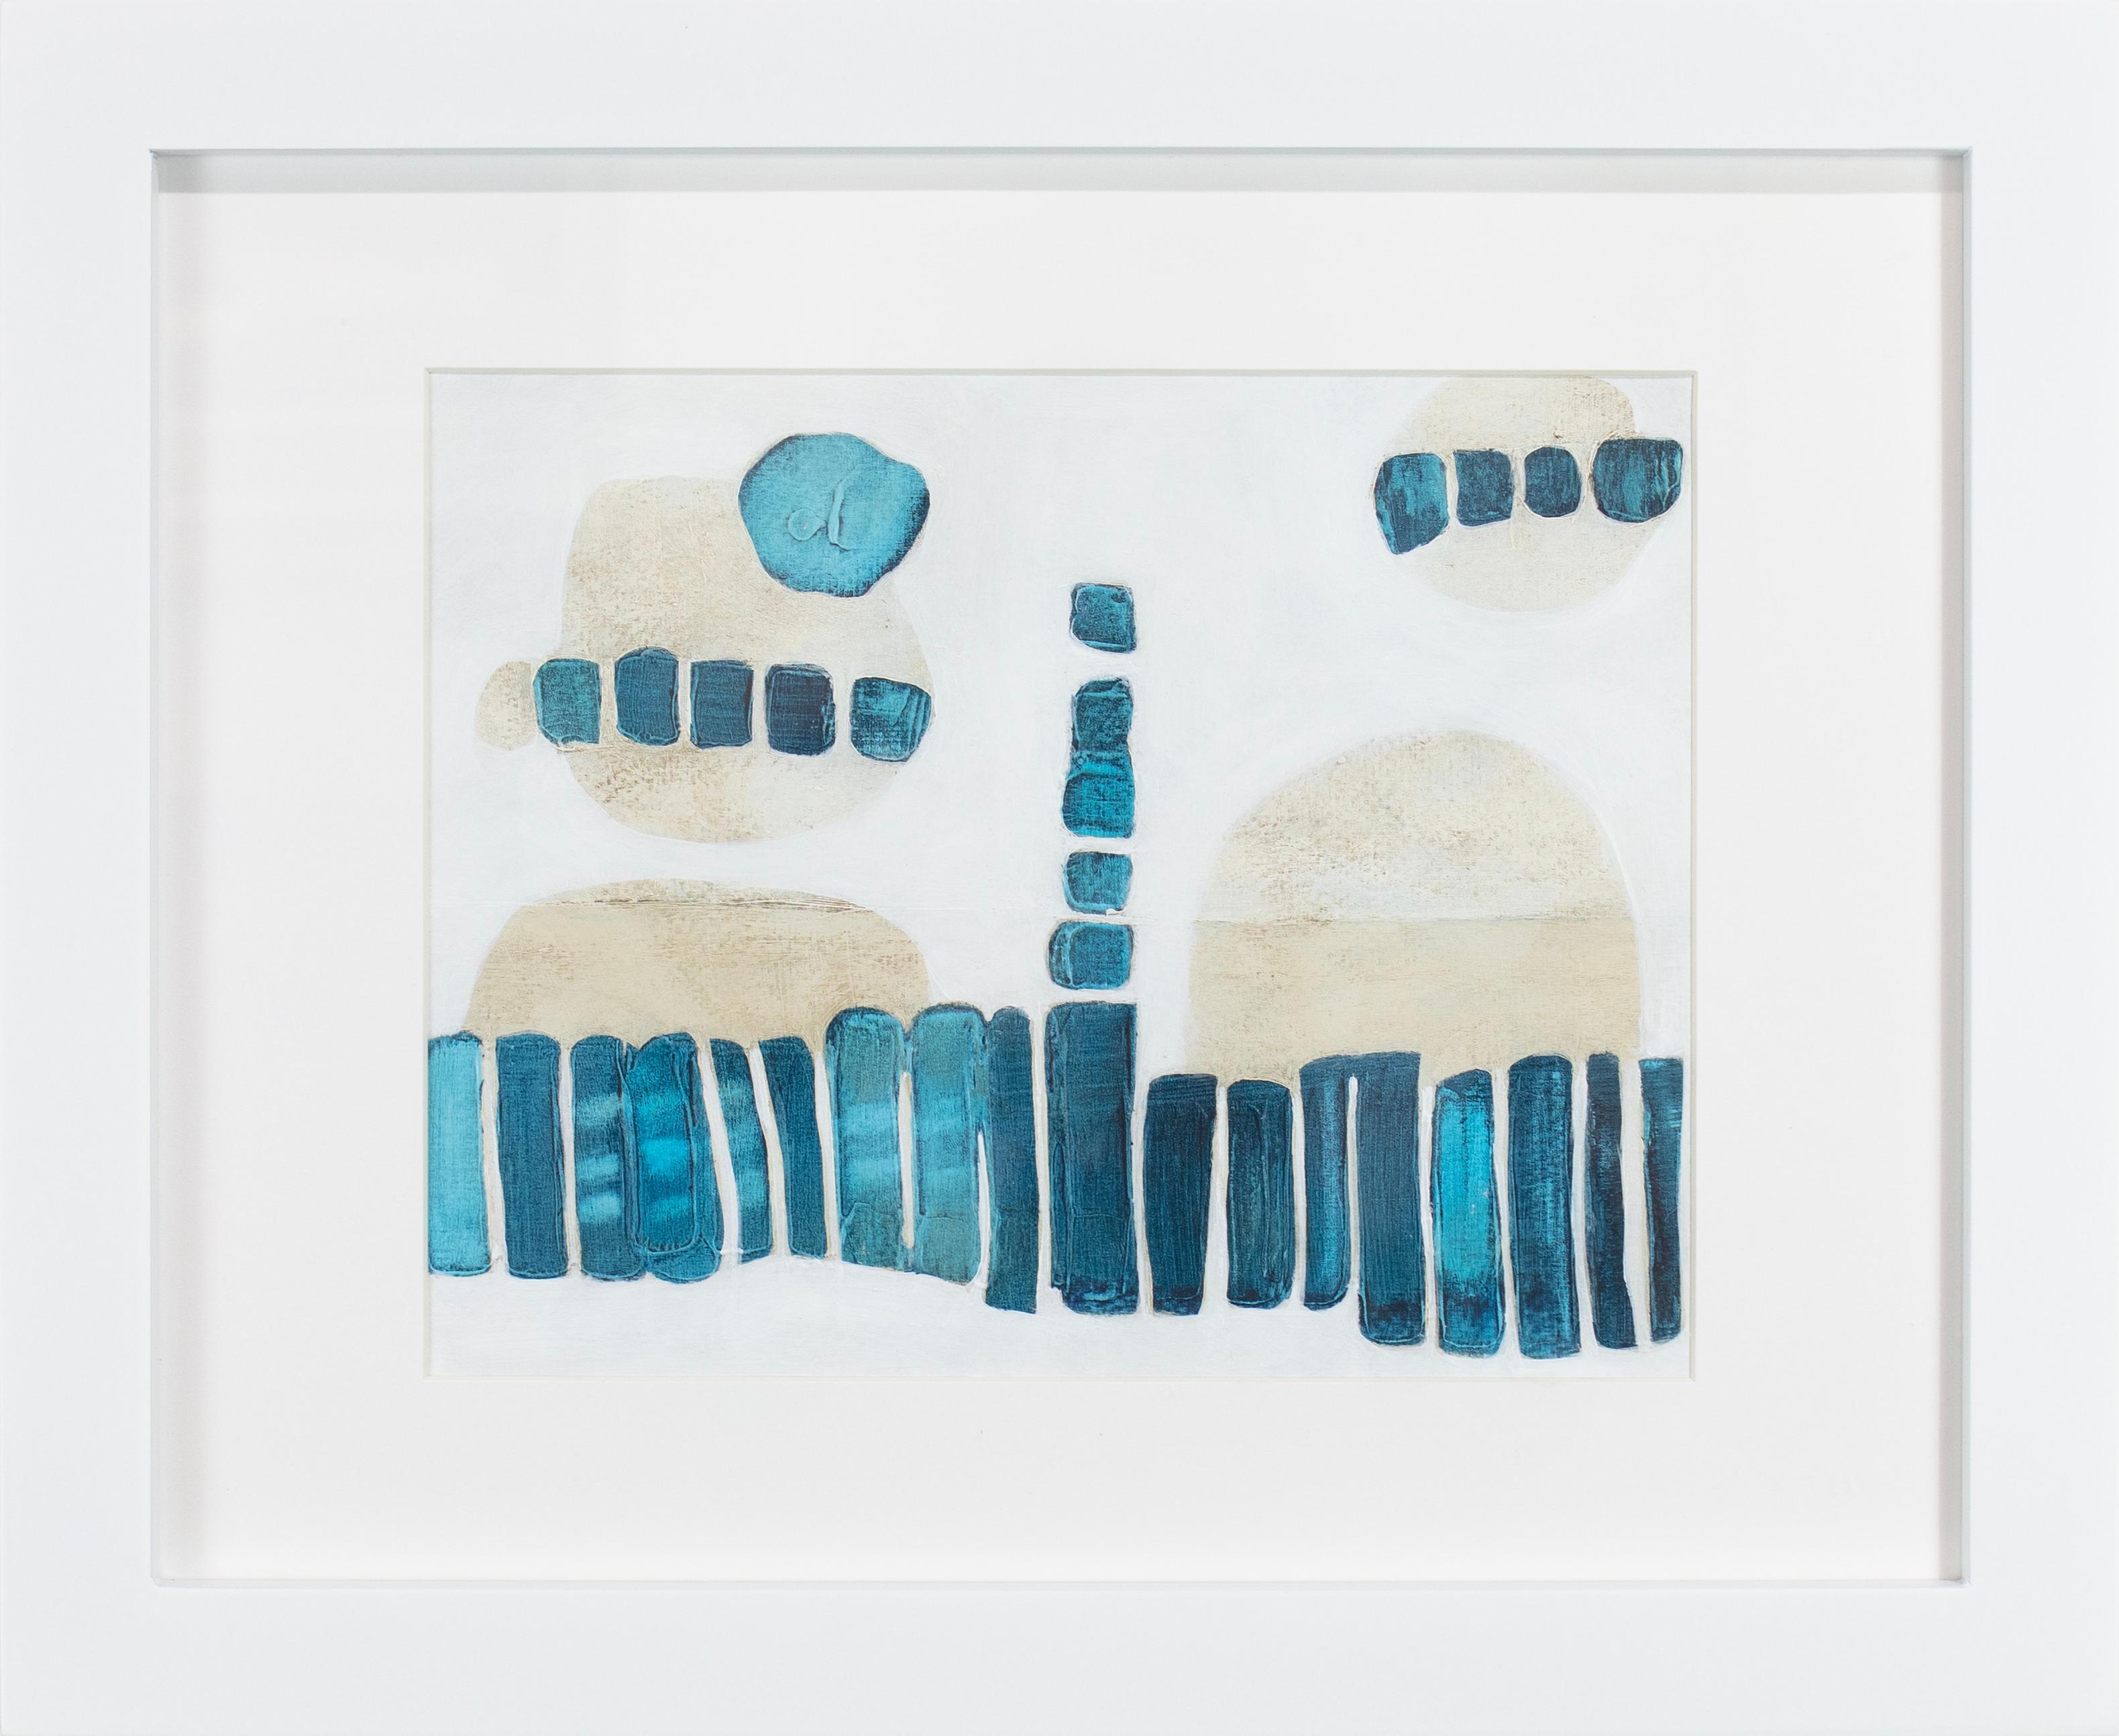 This small abstract painting by Sofie Swann features a coastal white, beige, and blue palette with arrangements of organic forms and shapes. This painting on paper measures 9" x 12" and is matted and framed in a clean, contemporary white frame.